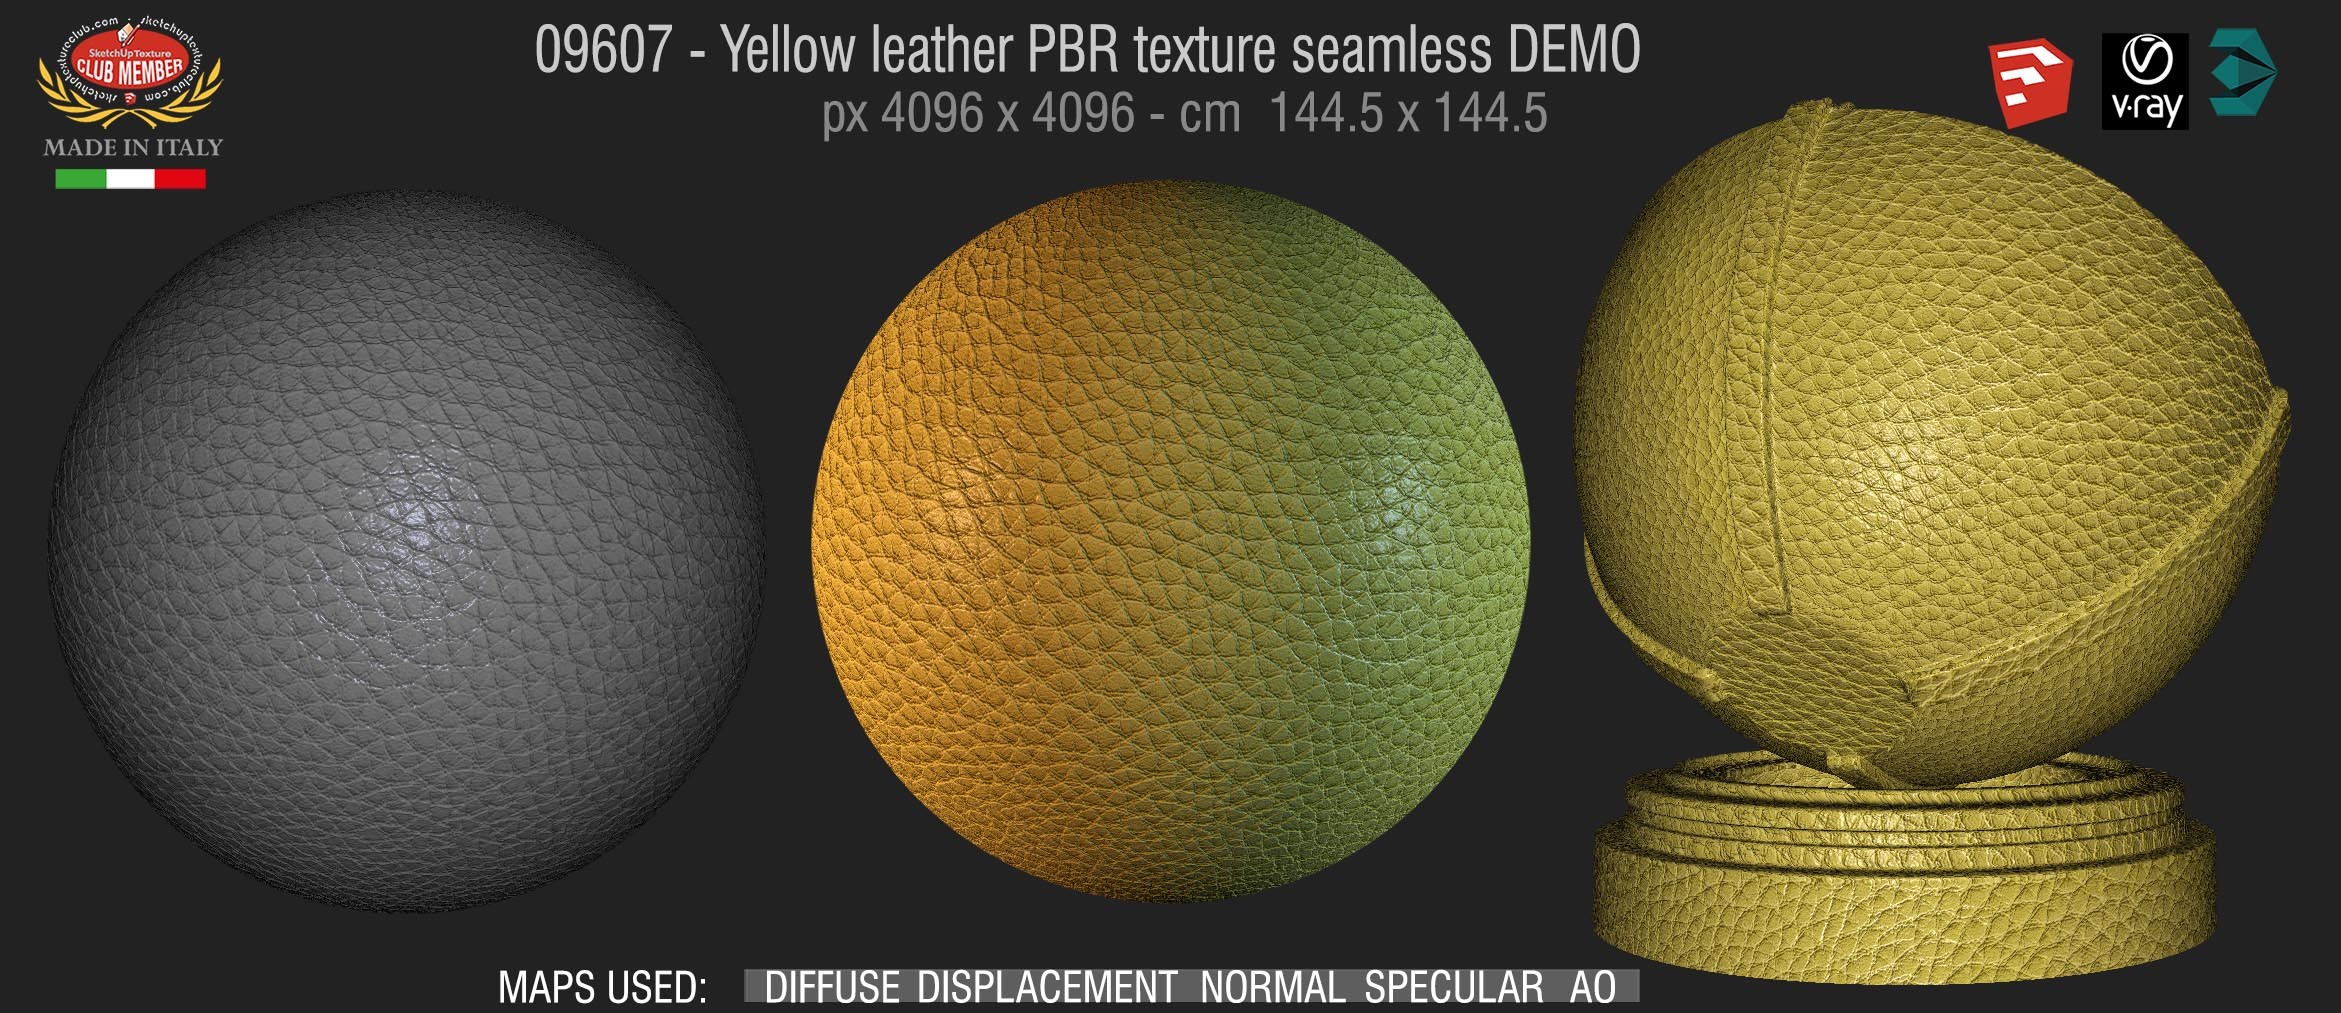 09607 Yellow leather PBR texture seamless DEMO